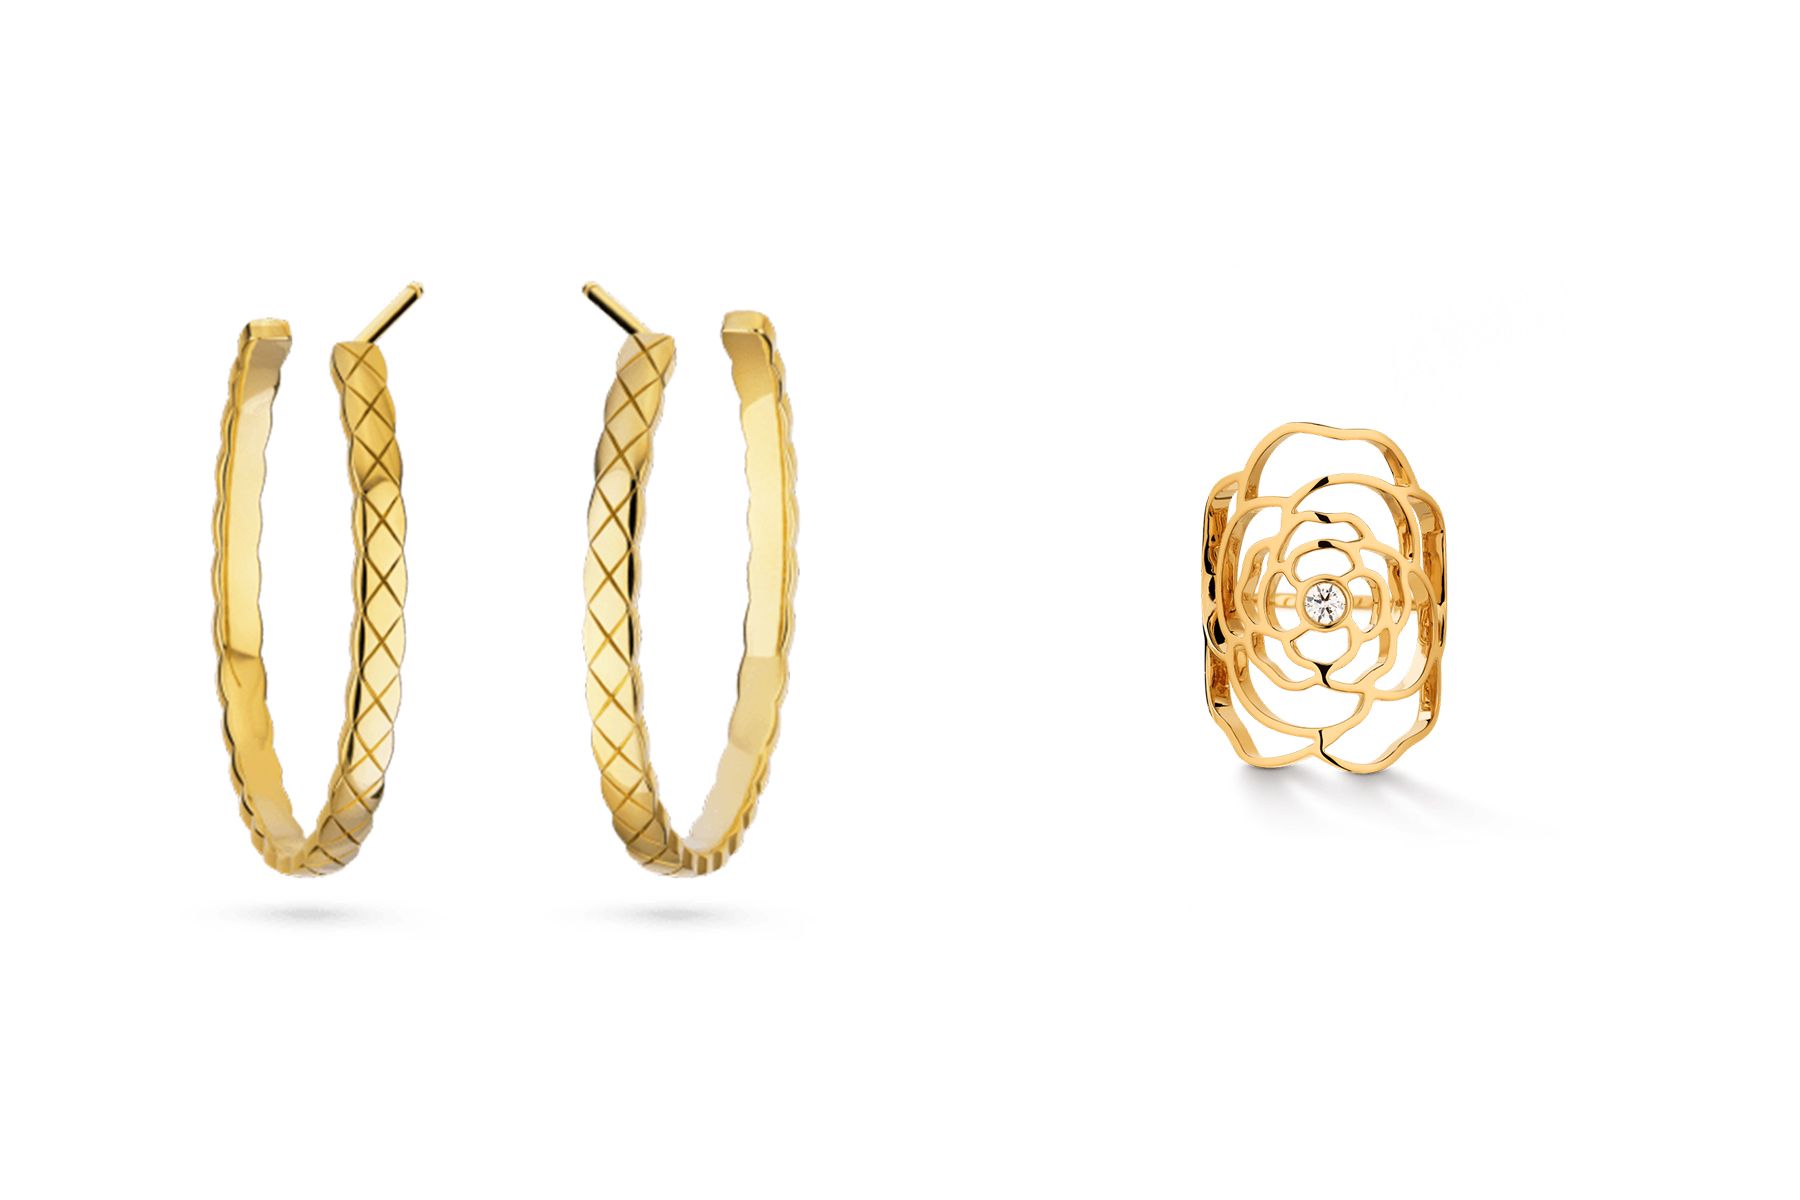 8 Incredible New Pieces from Luxury Jewelry Brands